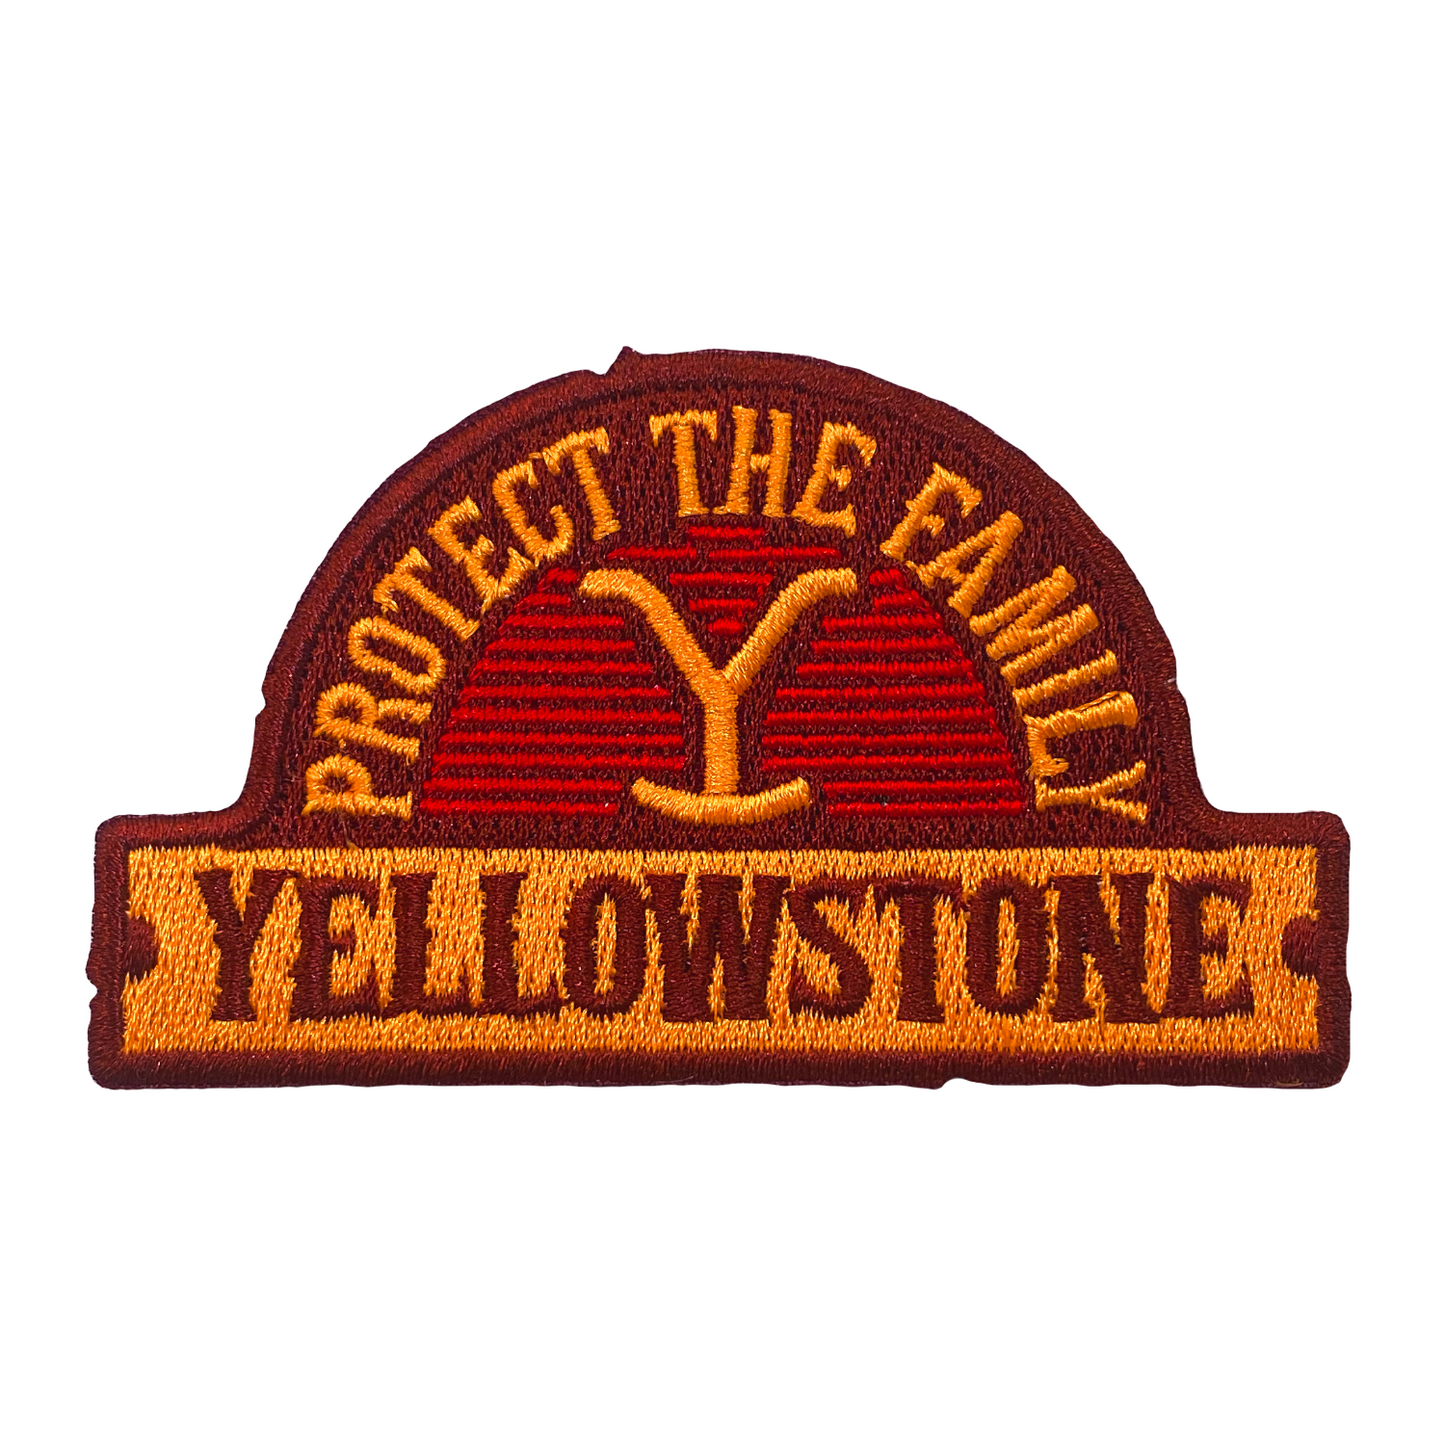 Yellowstone Dutton Ranch Iron On Patches - Pack of 3